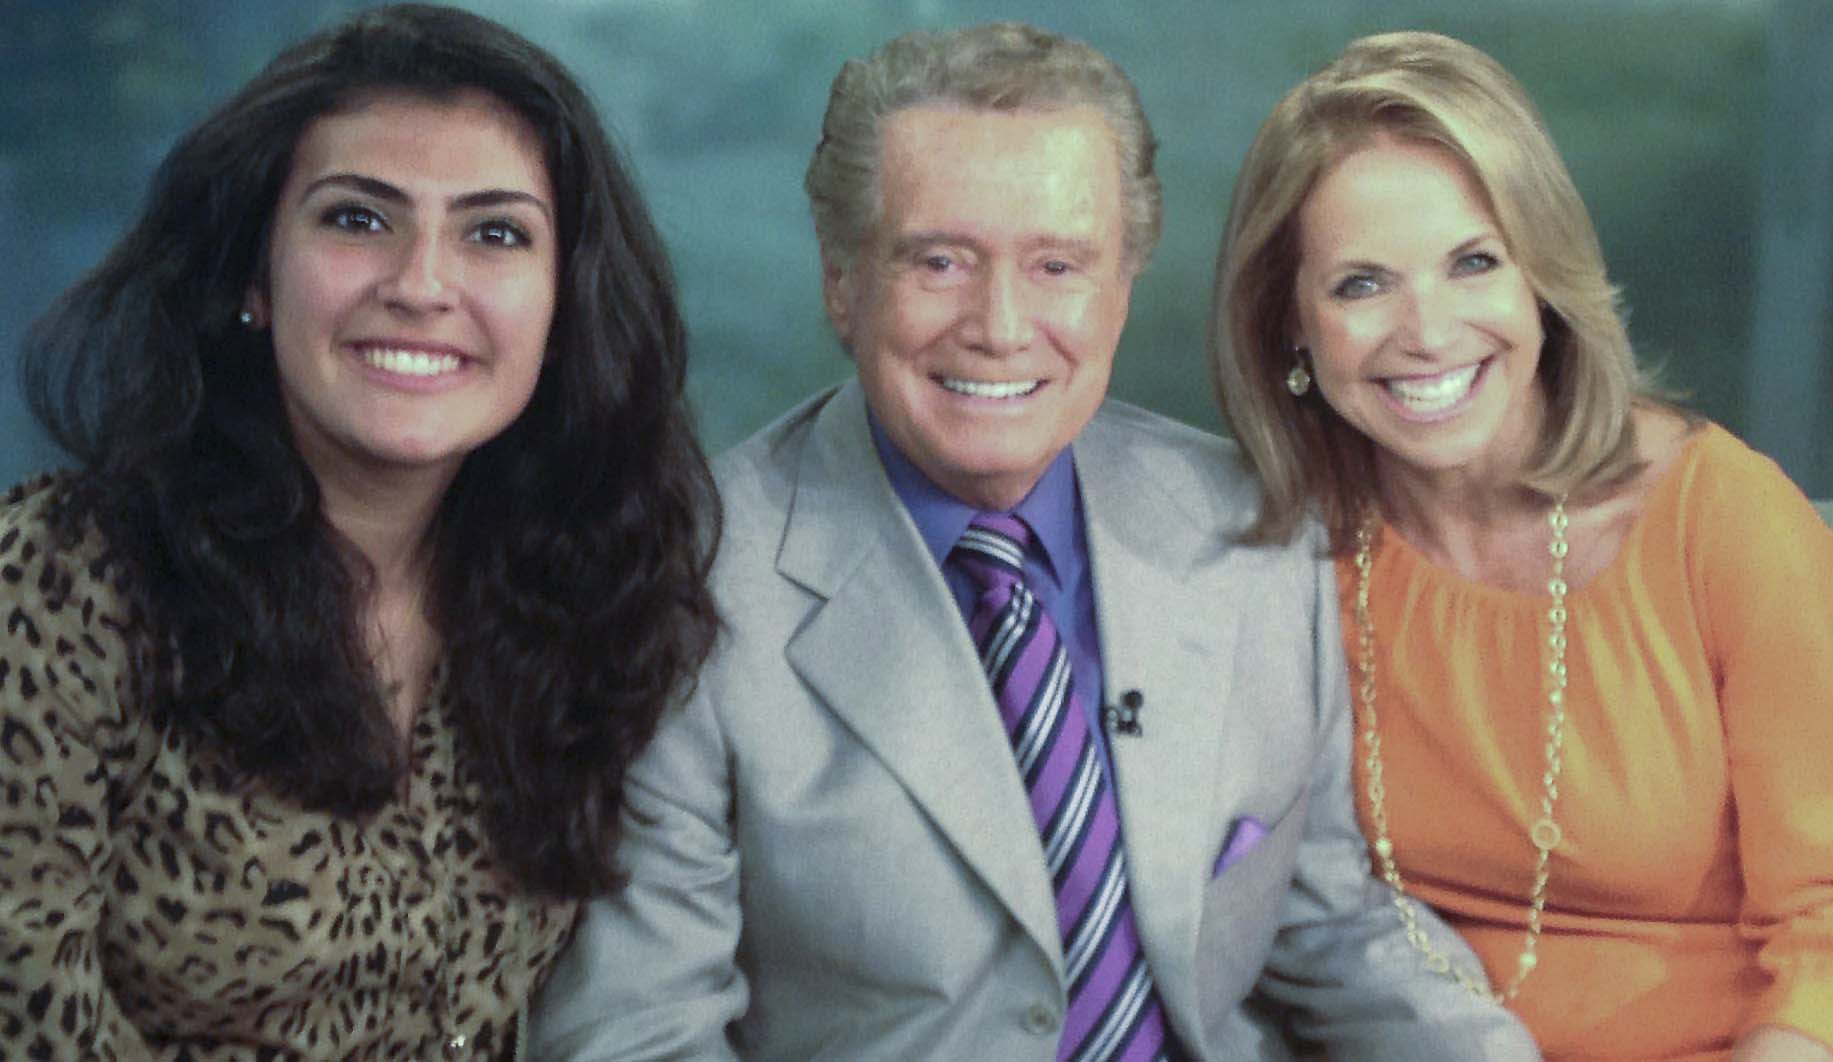 Group photo left to right: Netta Najand, Regis Philbin, and Katie Couric